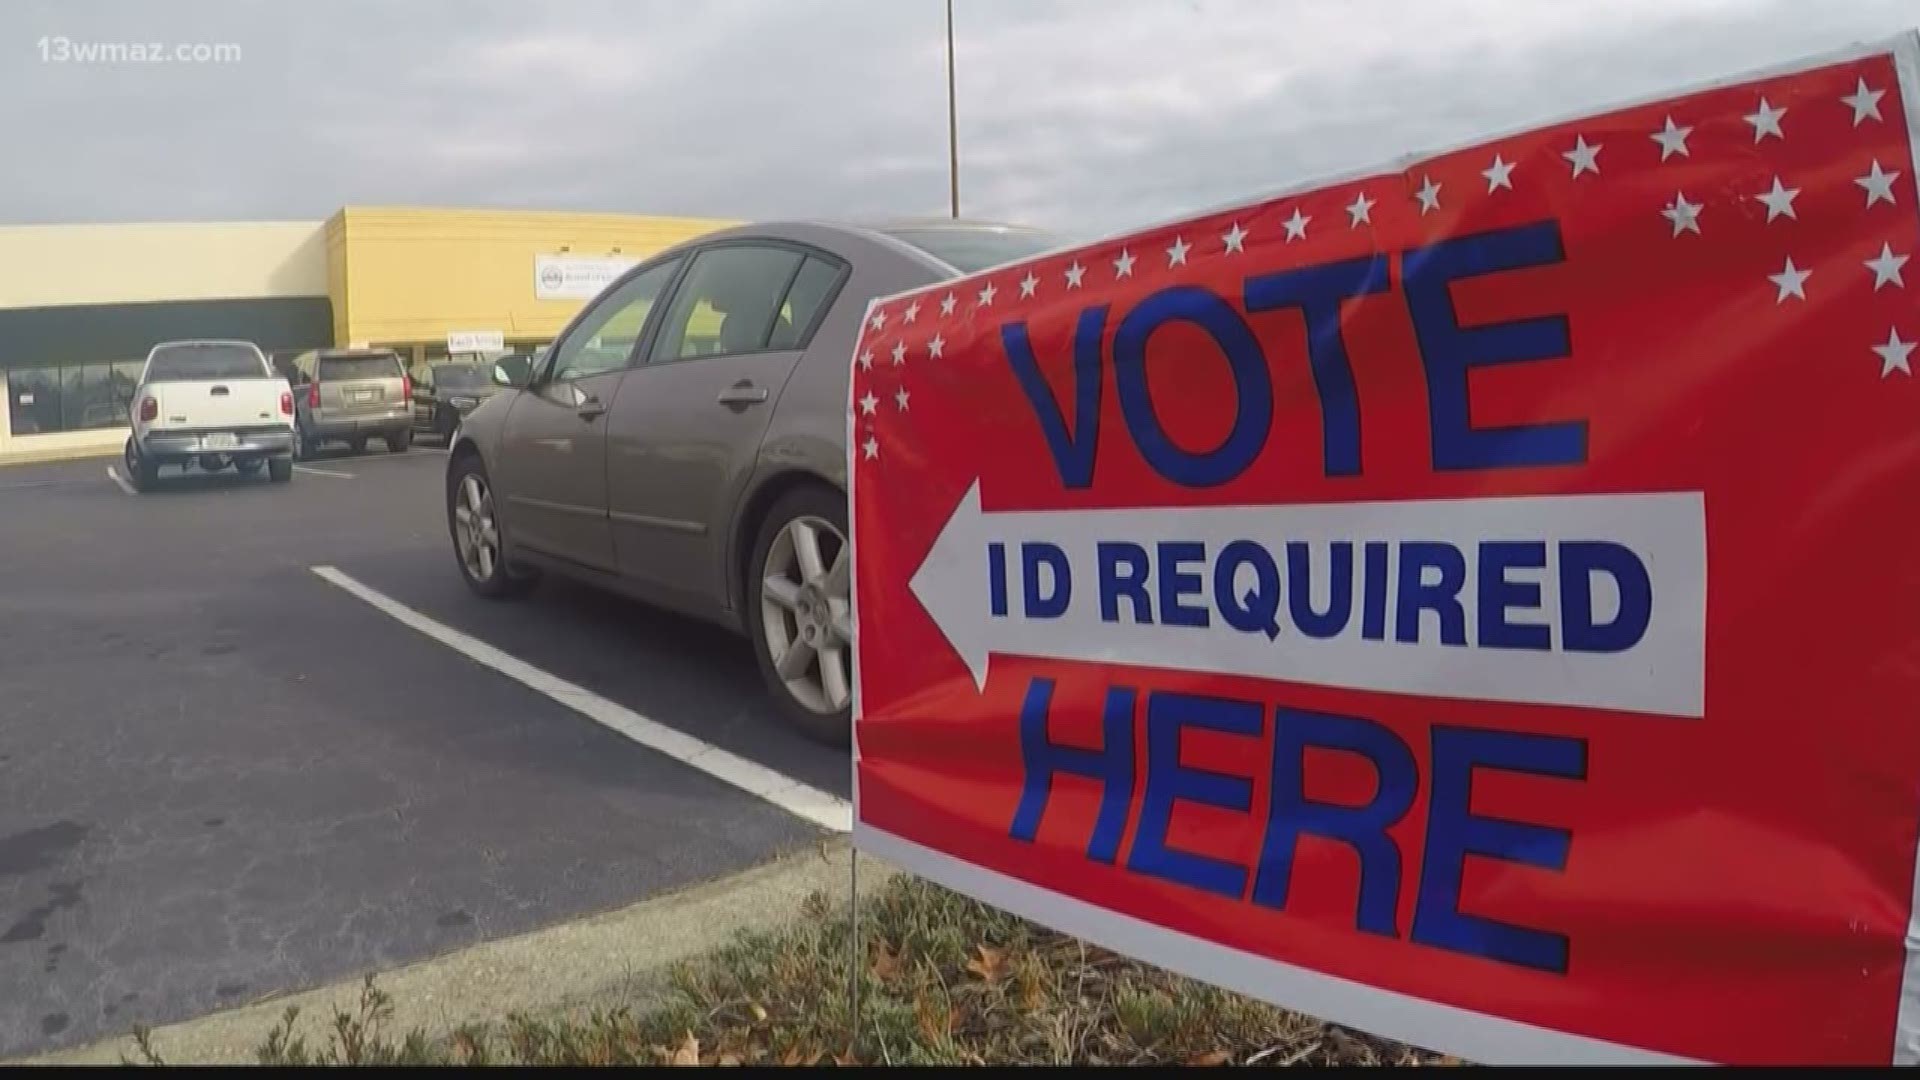 As COVID-19 continues spreading ahead of the Georgia primaries, Secretary of State Brad Raffensperger is working to ease the way Georgians can cast their ballot.